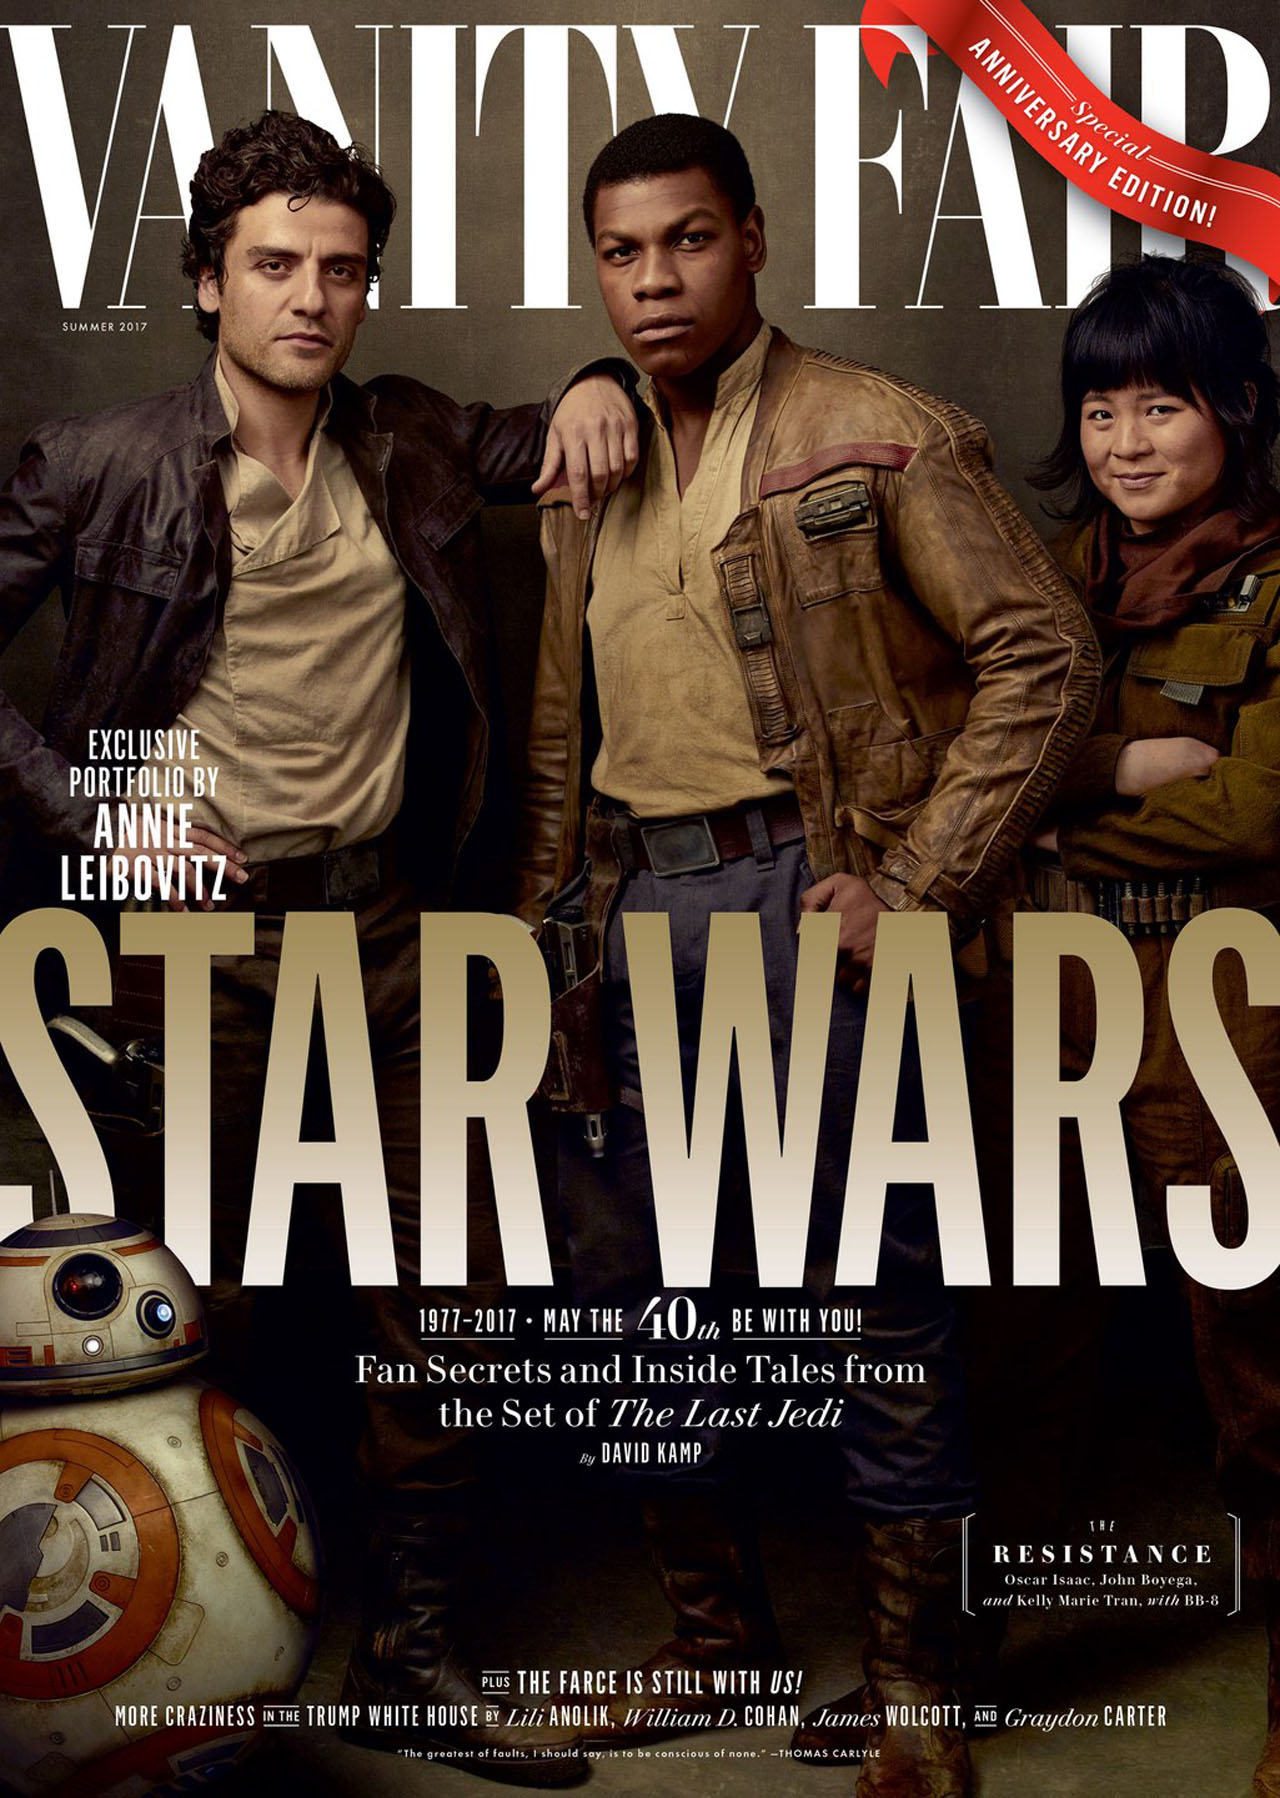 Cast Of Star Wars: The Last Jedi Takes Over Vanity Fair And It’s Glorious